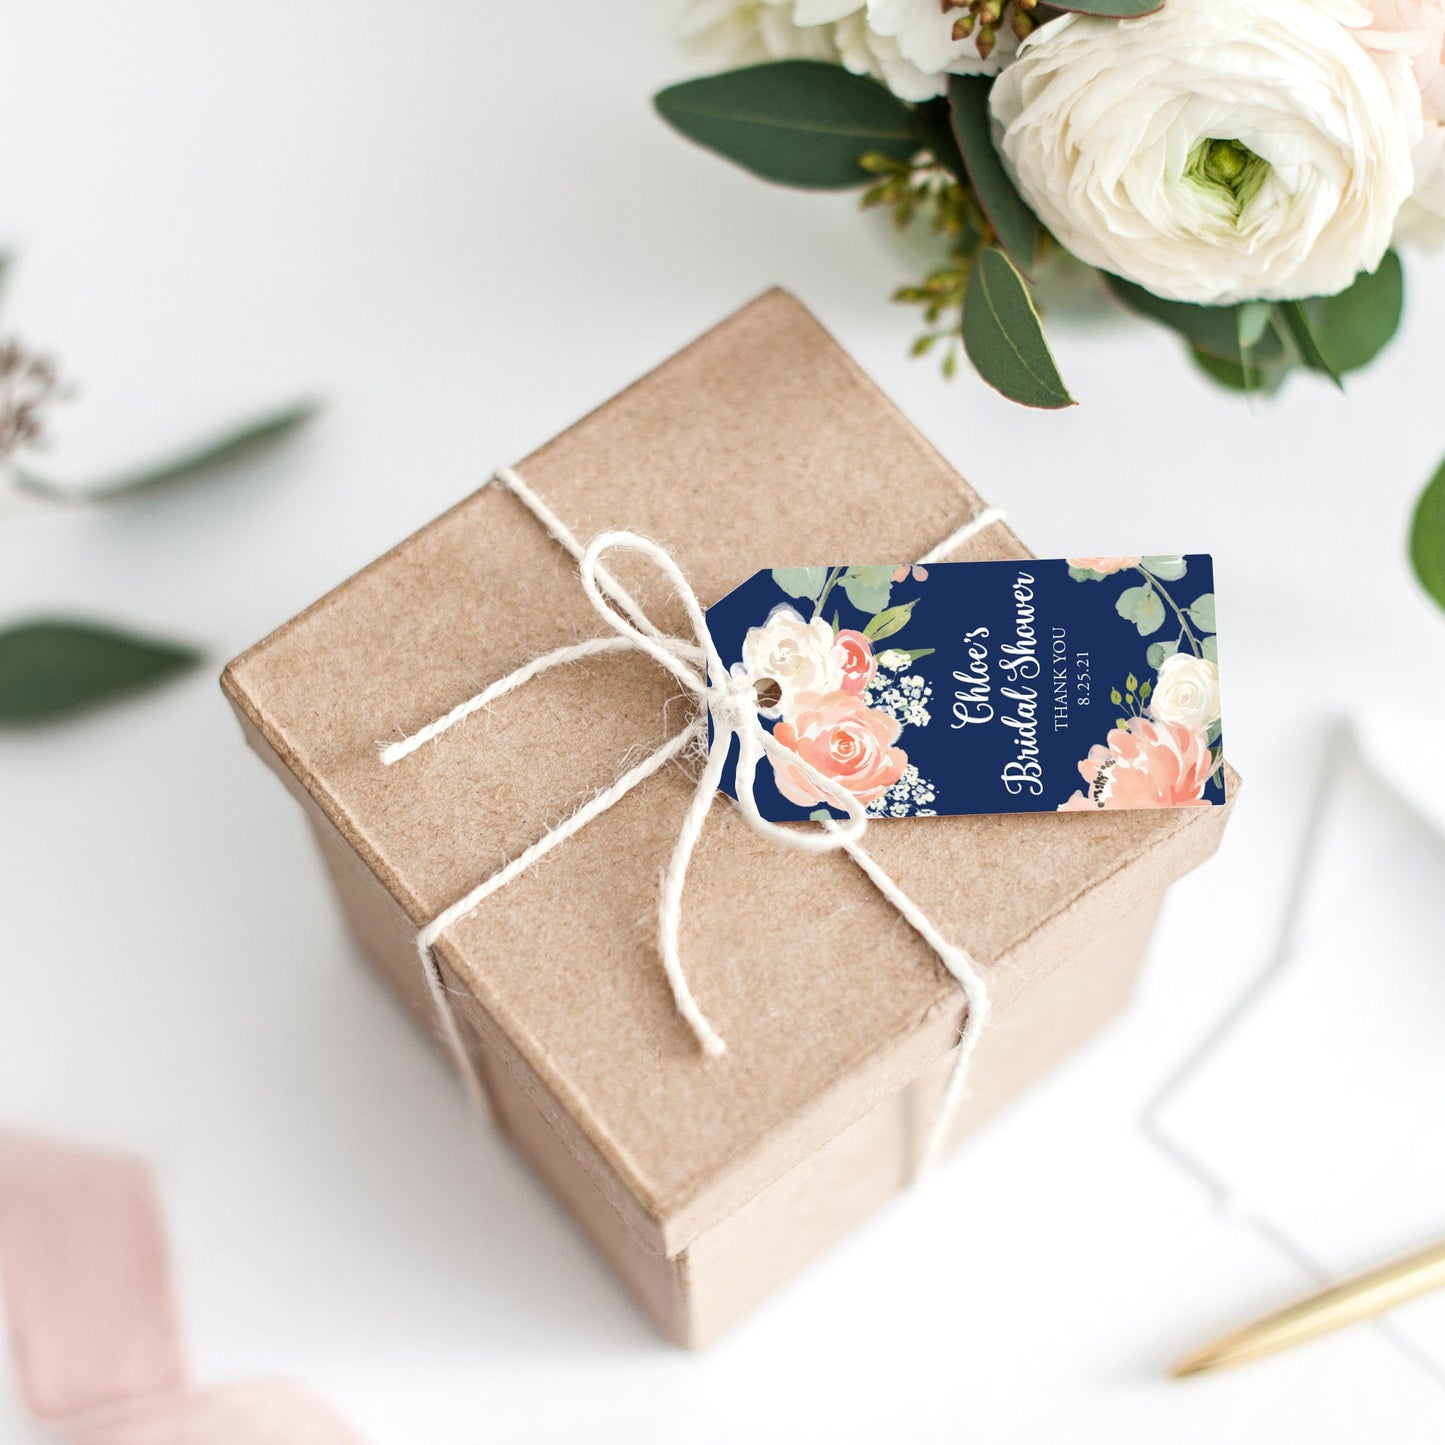 Lux Party’s navy blue bridal shower tag with white script and pastel flowers, tied to a brown kraft favor box.